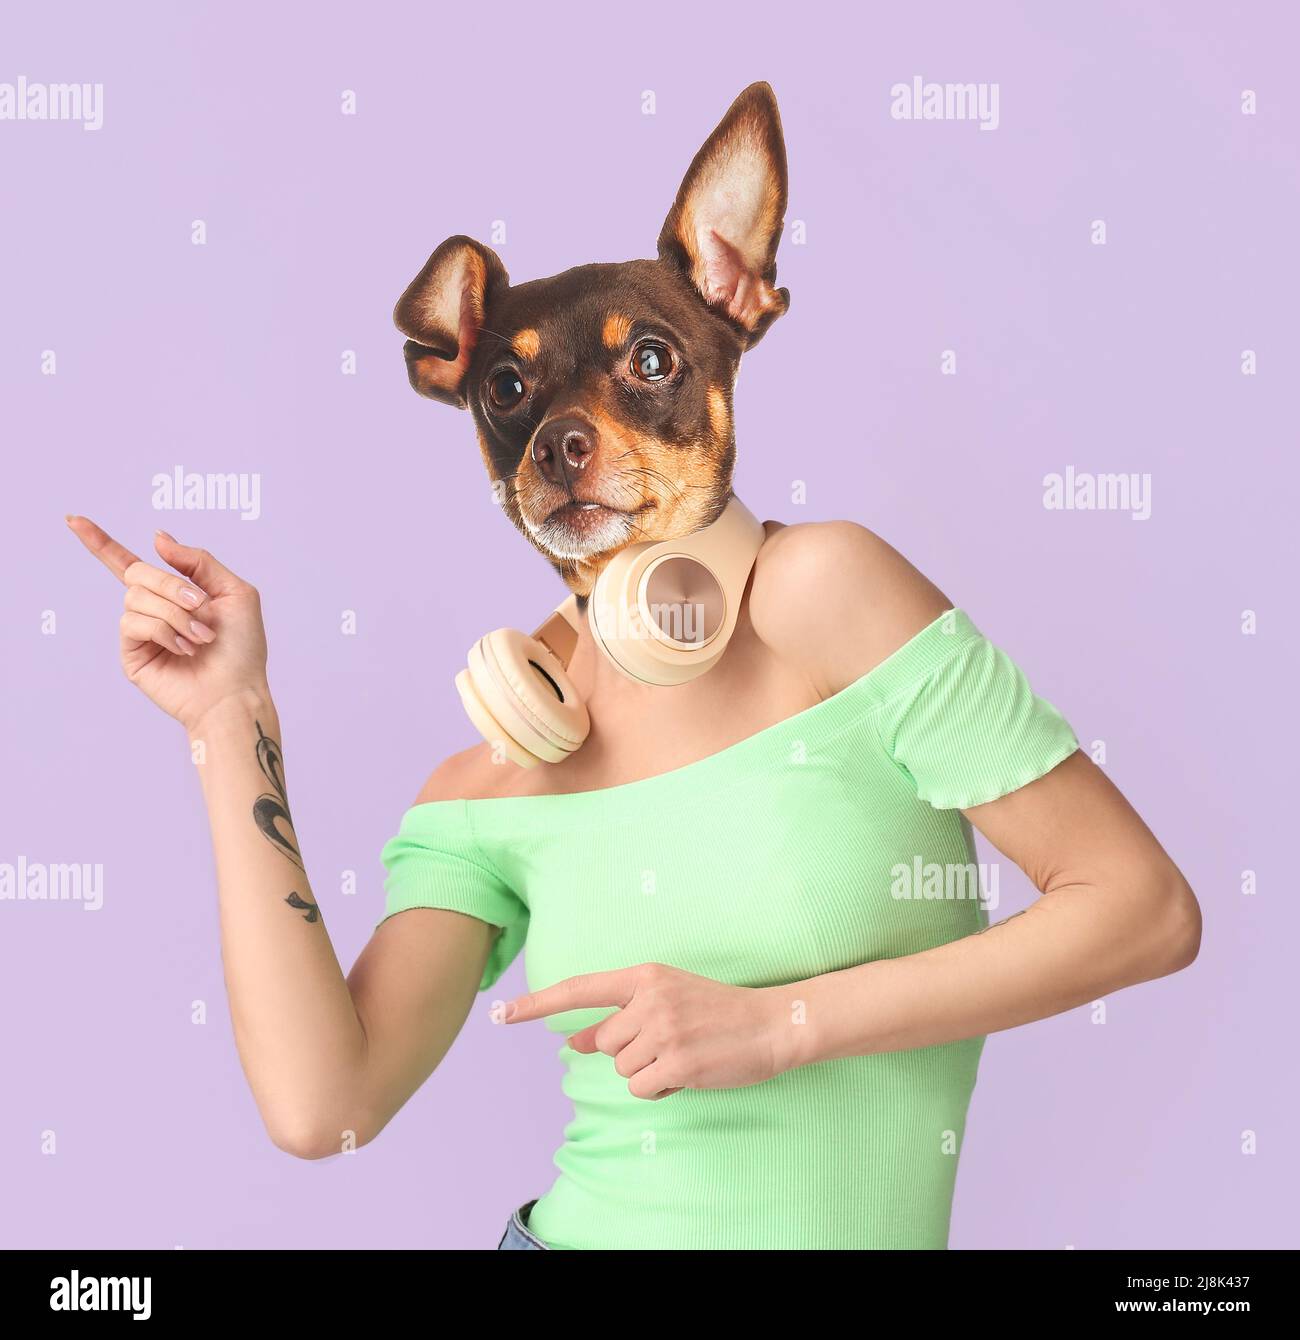 Funny dancing dog with human body on lilac background Stock Photo - Alamy